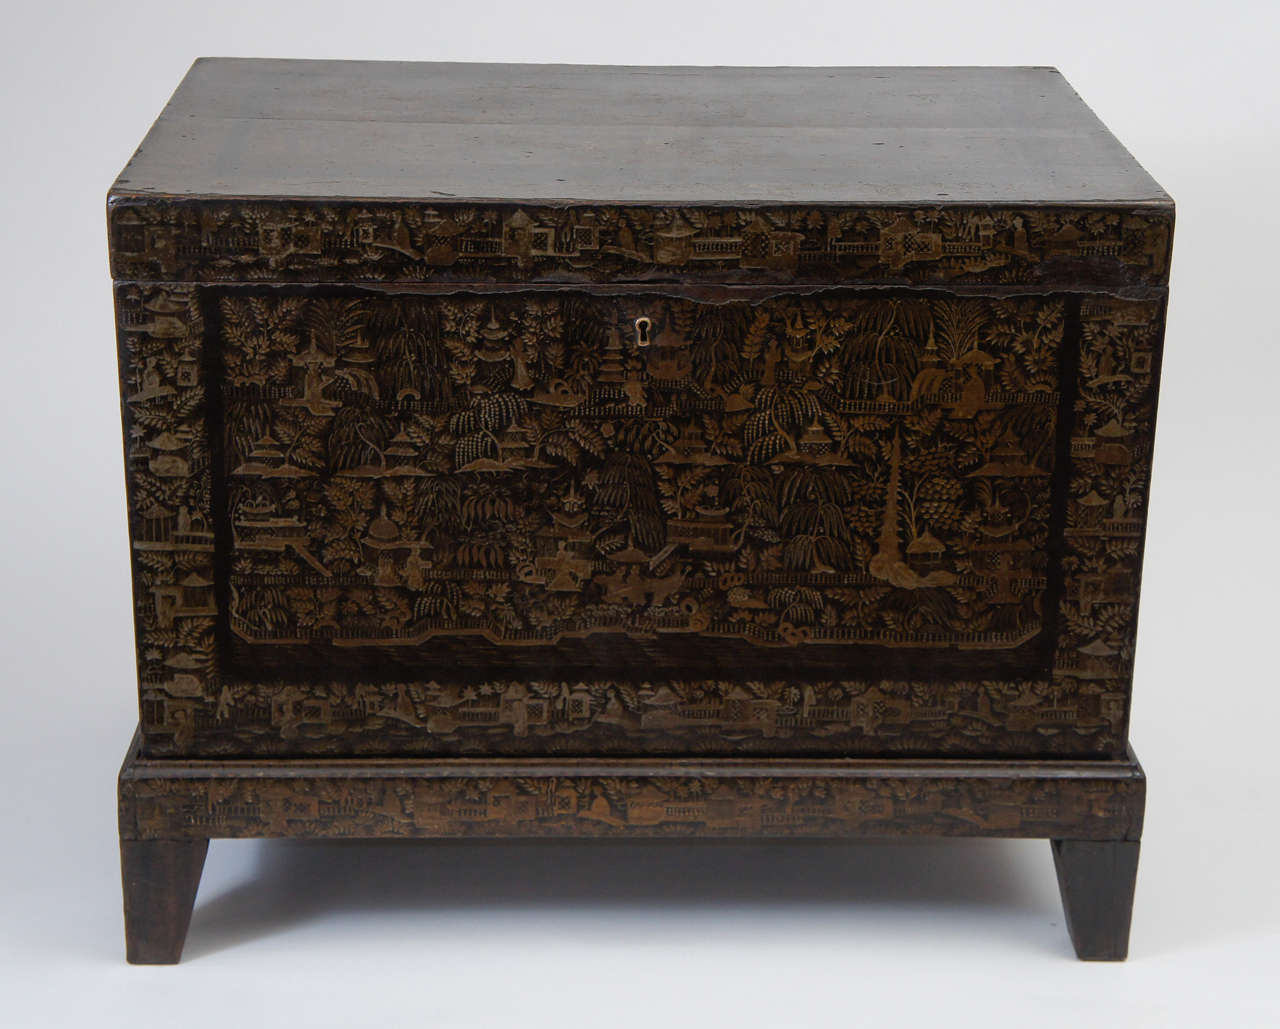 Gilt Anglo-Indian Chinoiserie Lacquer Chest, c. 1820